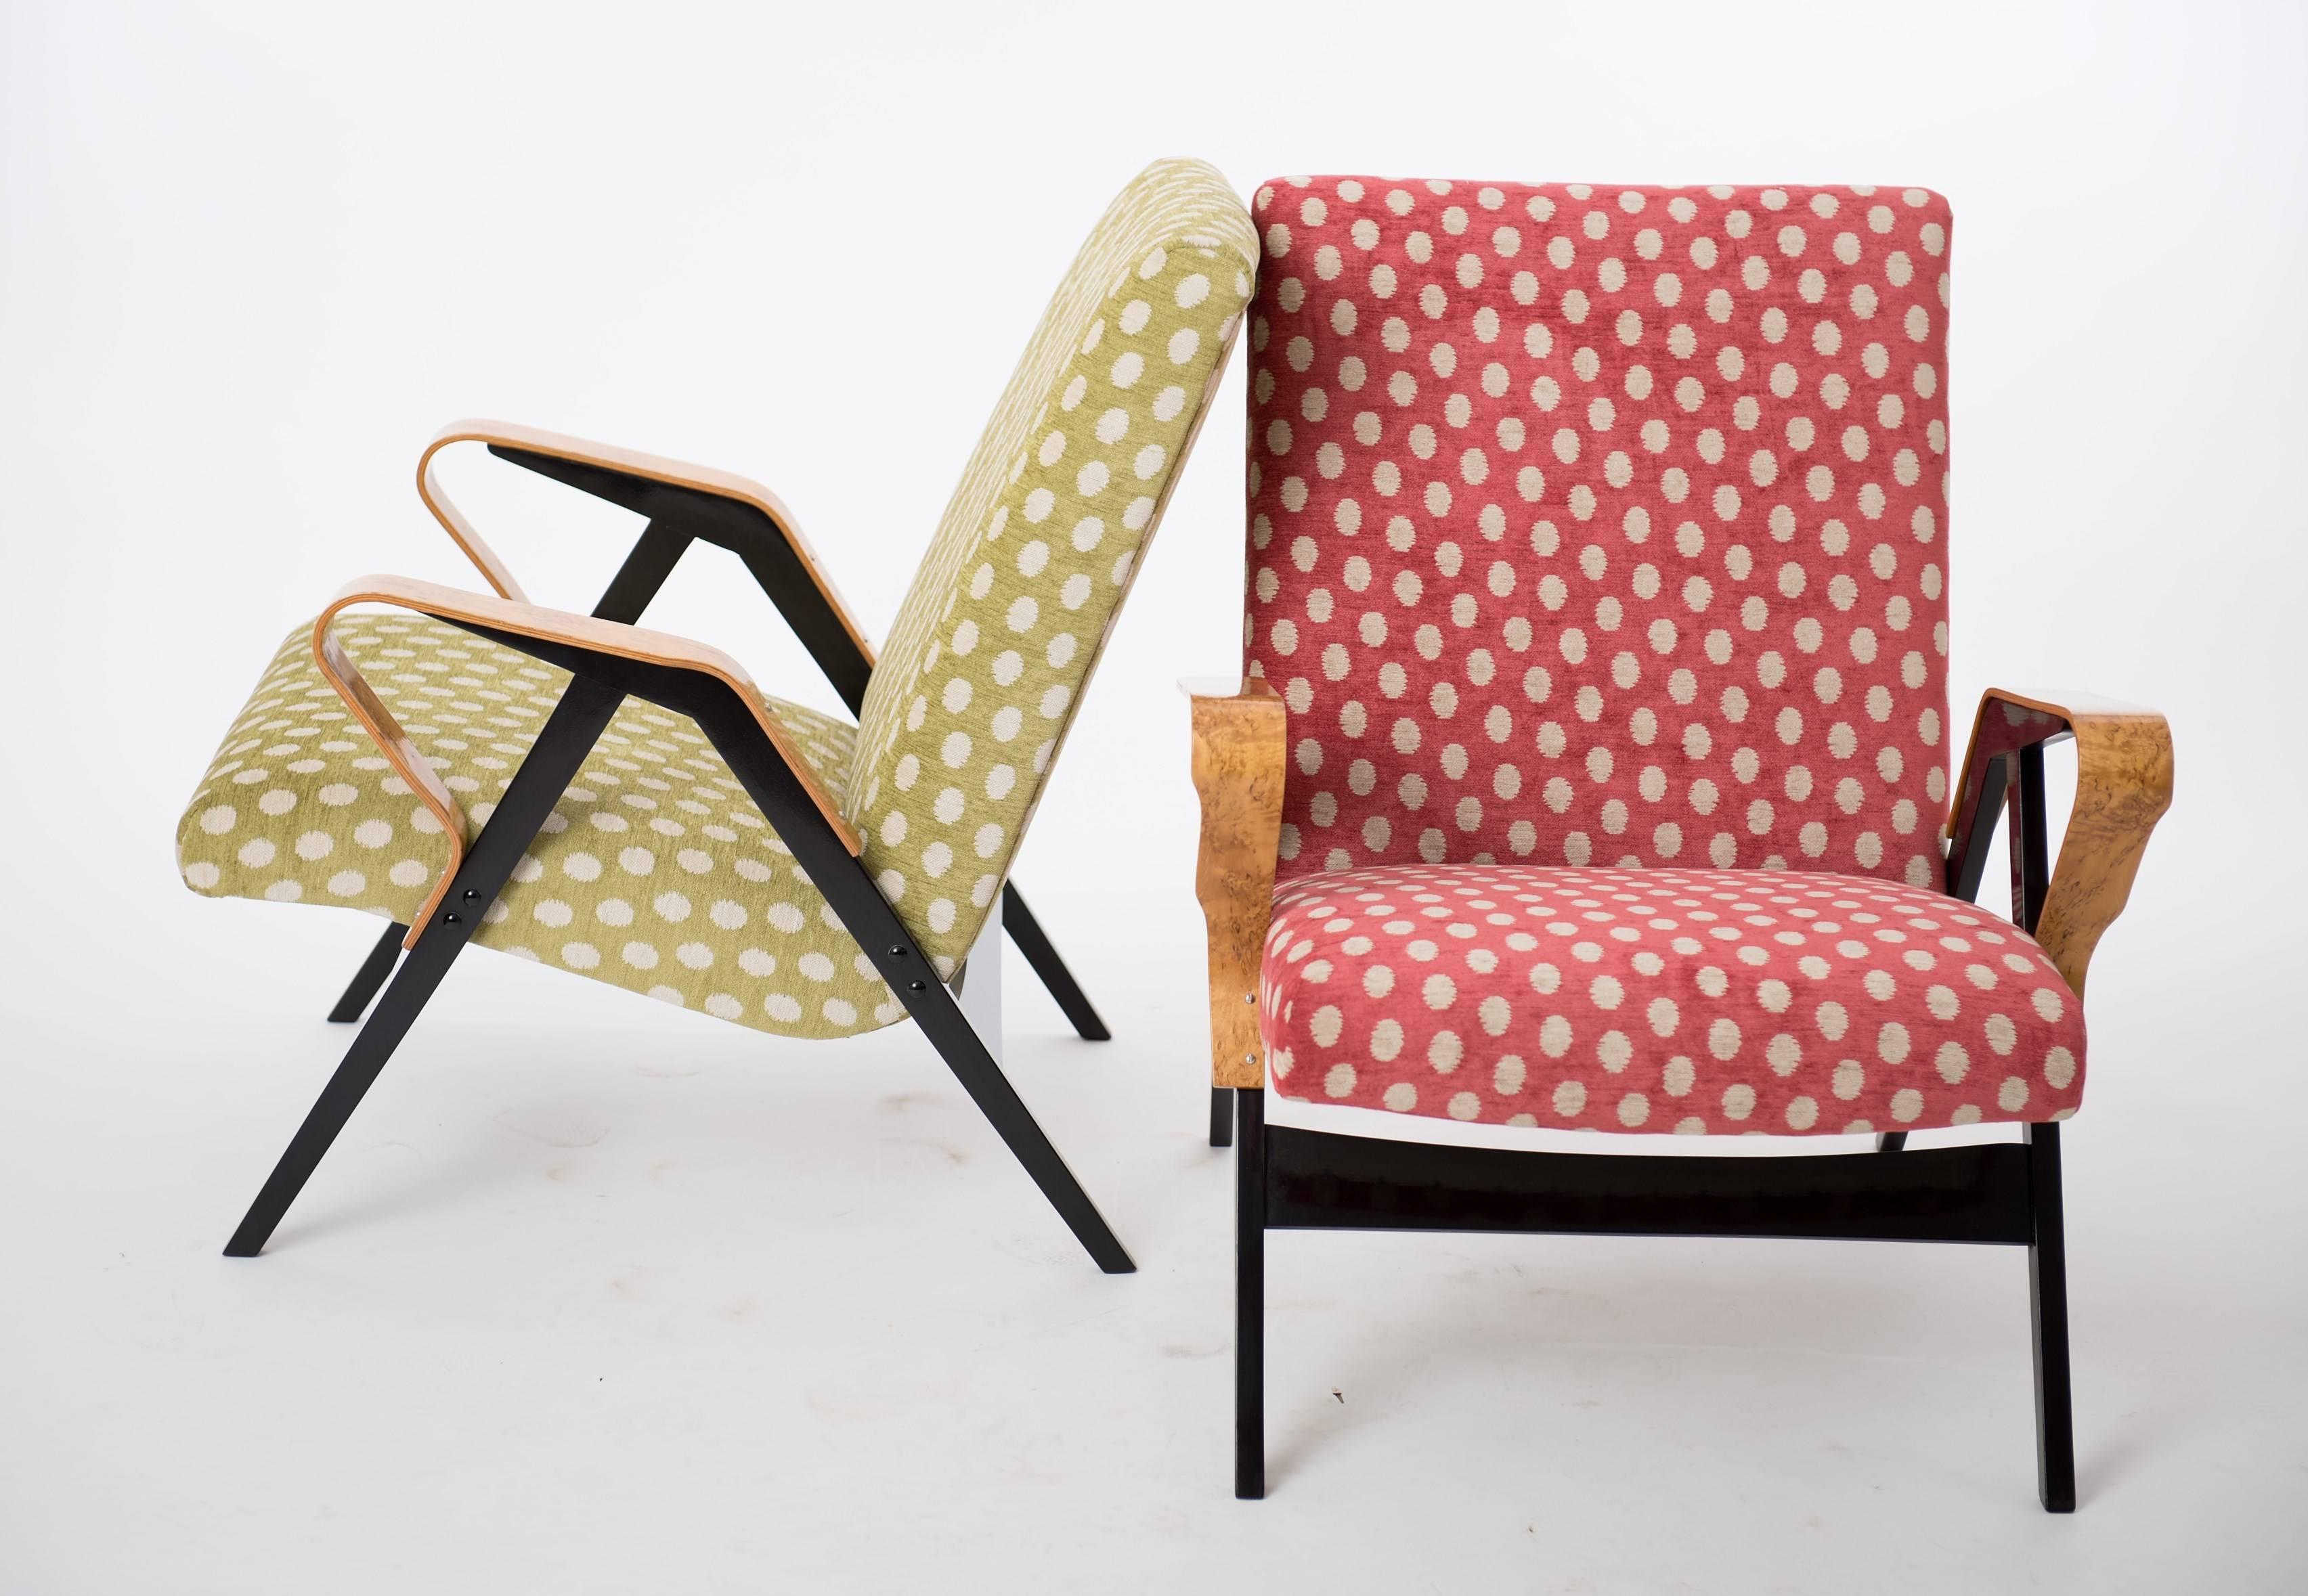 These two lounge chairs were produced in the 1960s by the Czechoslovak company Tatra. They feature new upholstery in English fabric from Colefax and Fowler.